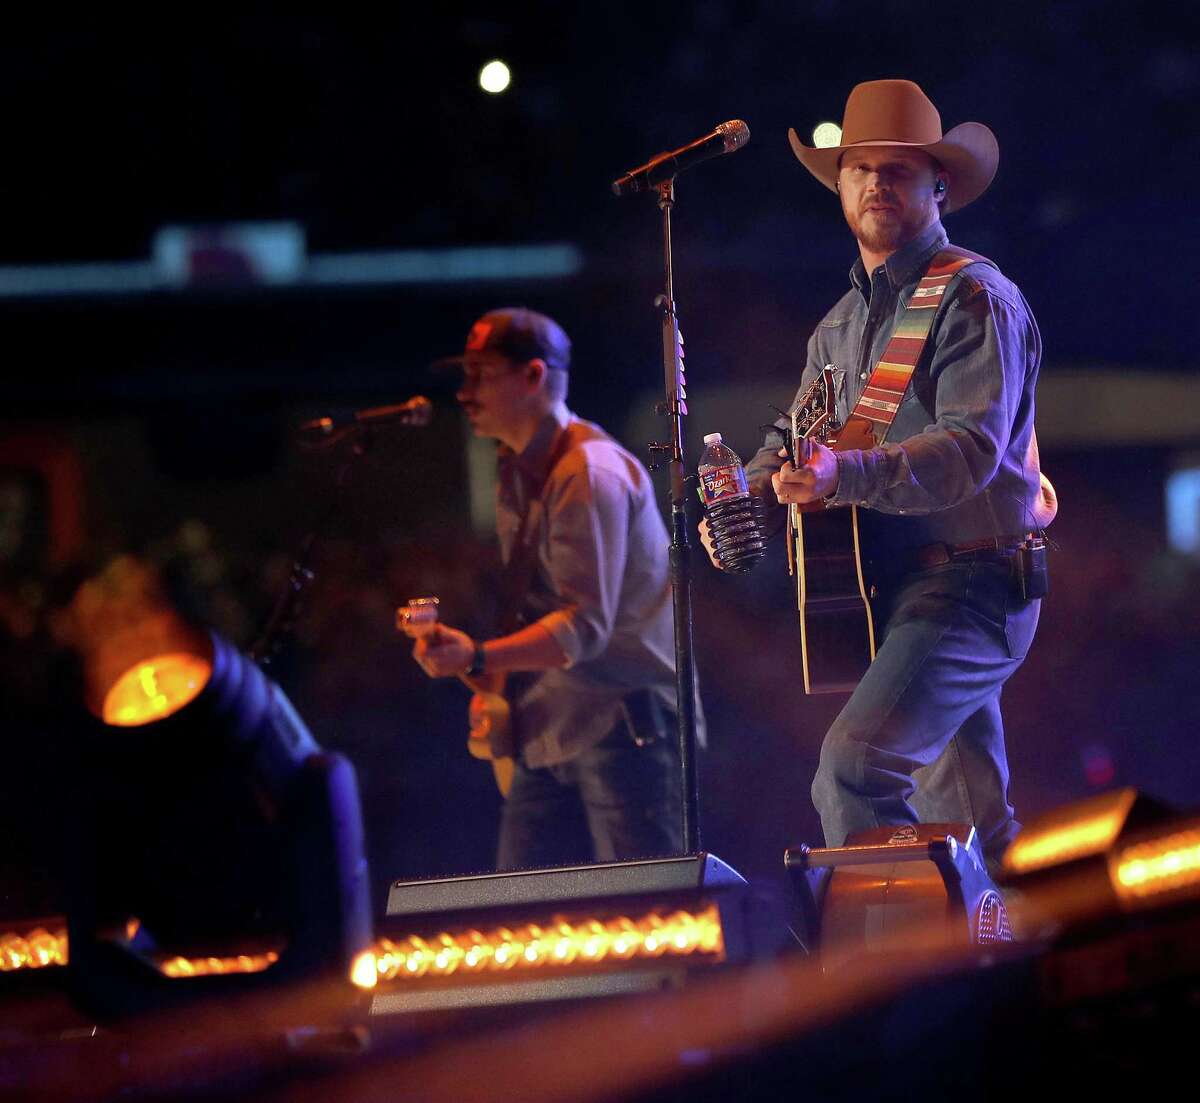 Cody Johnson performs in concert at the Houston Livestock Show and Rodeo at NRG Stadium, Saturday, March 10, 2018, in Houston. ( Karen Warren / Houston Chronicle )